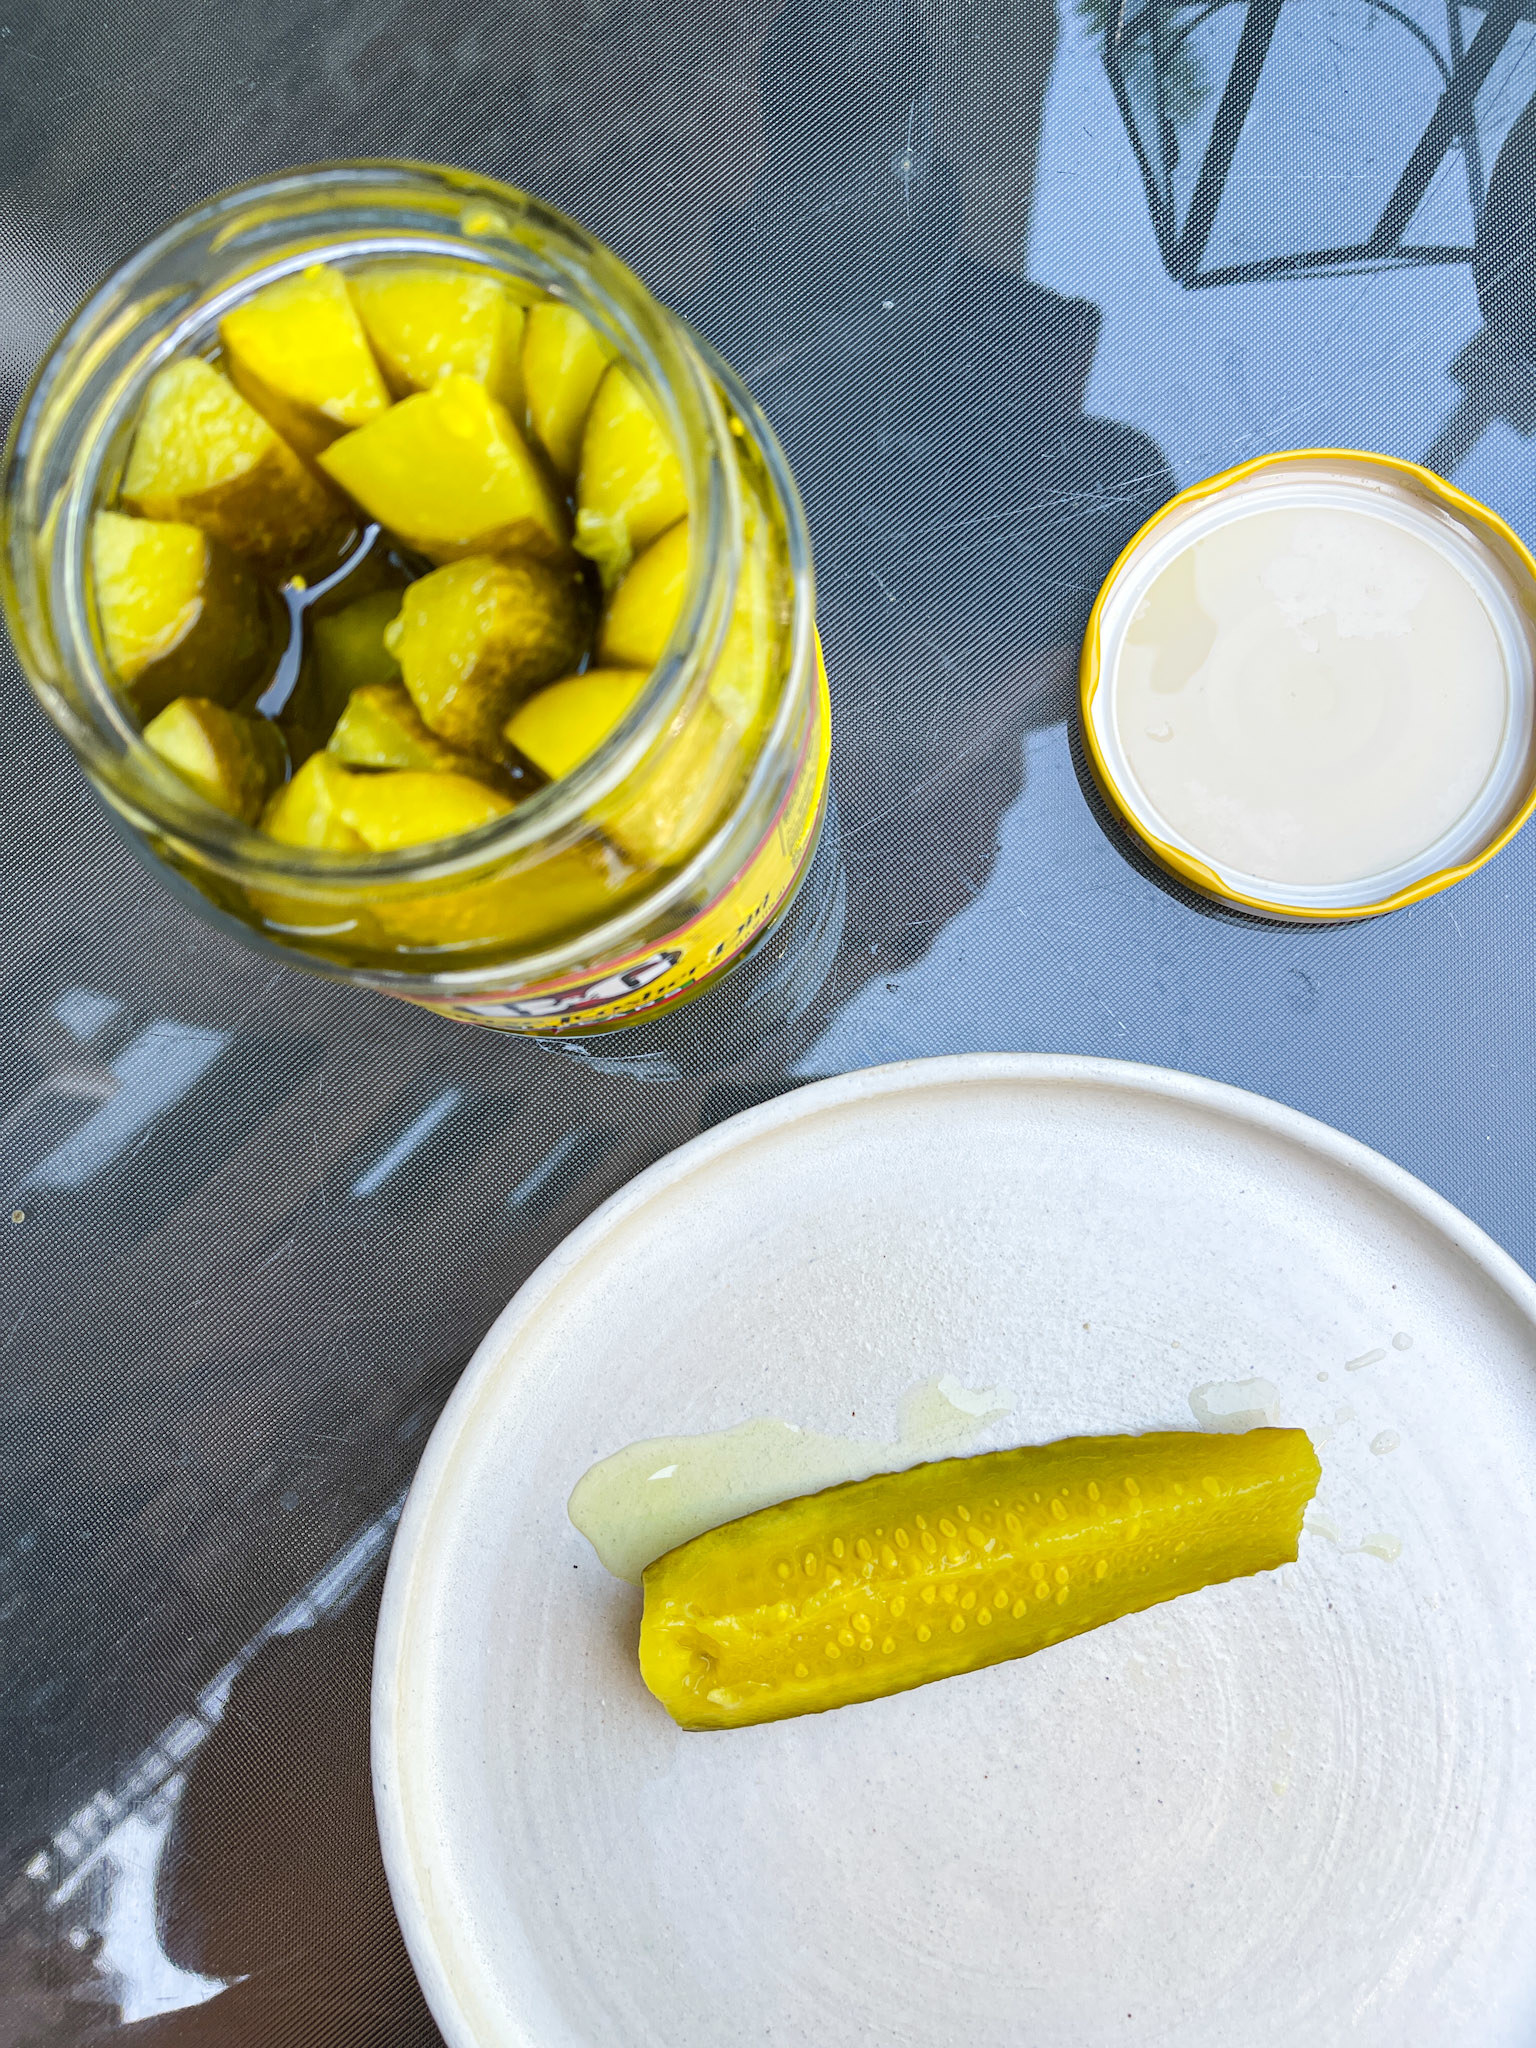 Top view of an open pickle jar with pickles and a single pickle on a plate